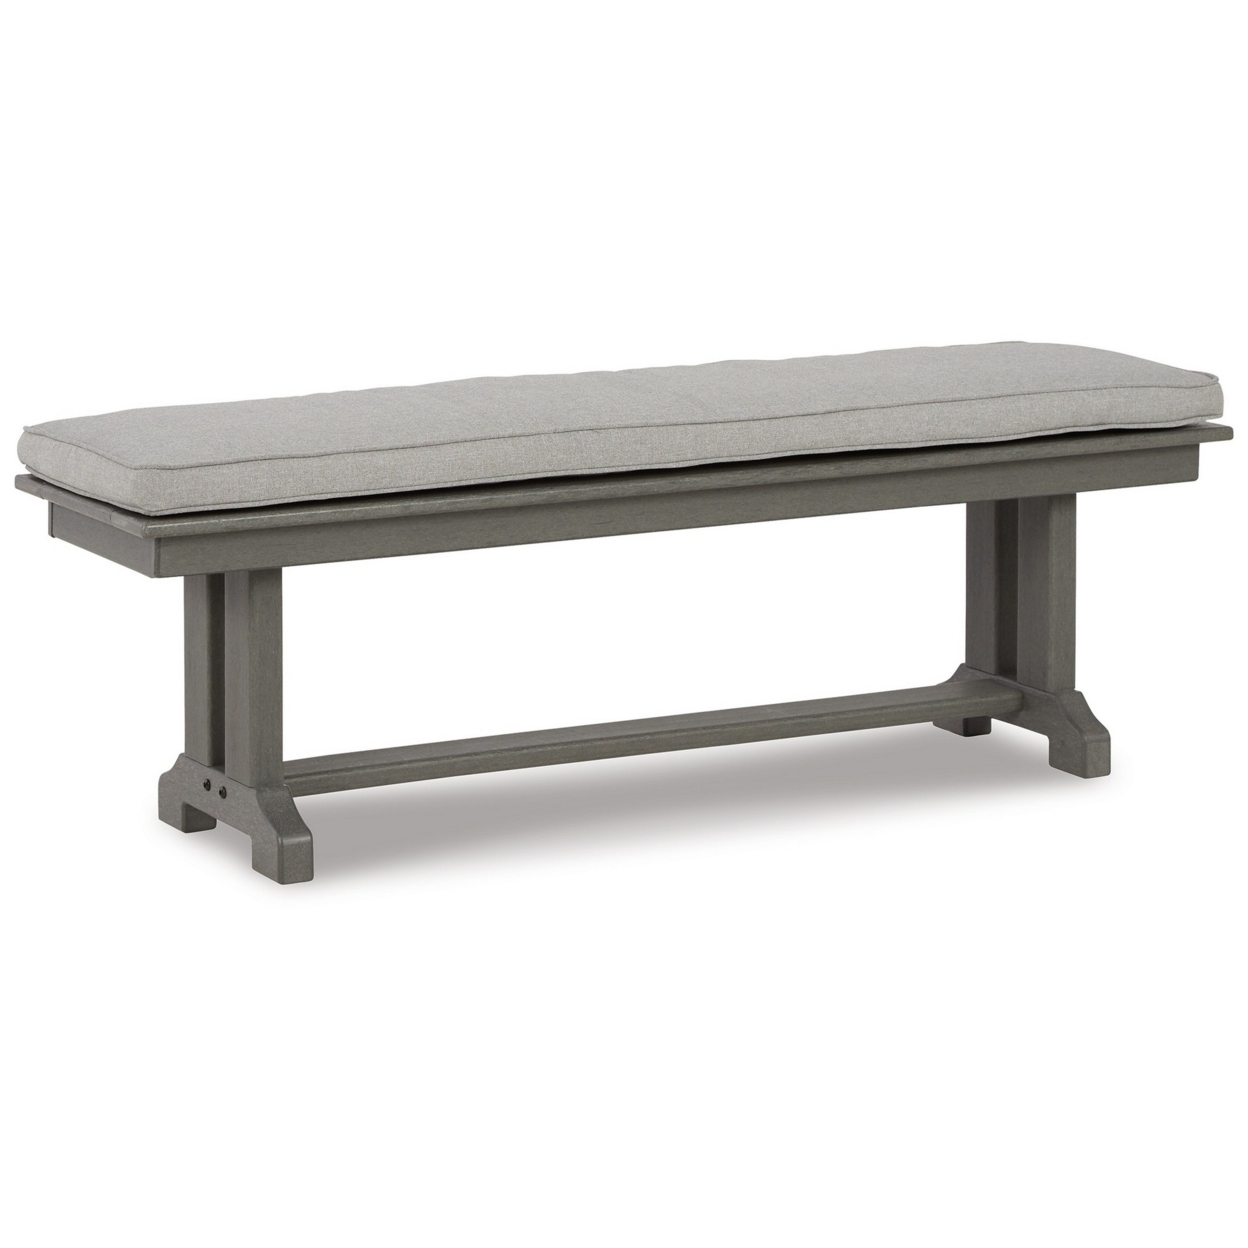 Vrai 54 Inch Outdoor Bench, Gray Wood Frame, Trestle Base, Cushioned Seat